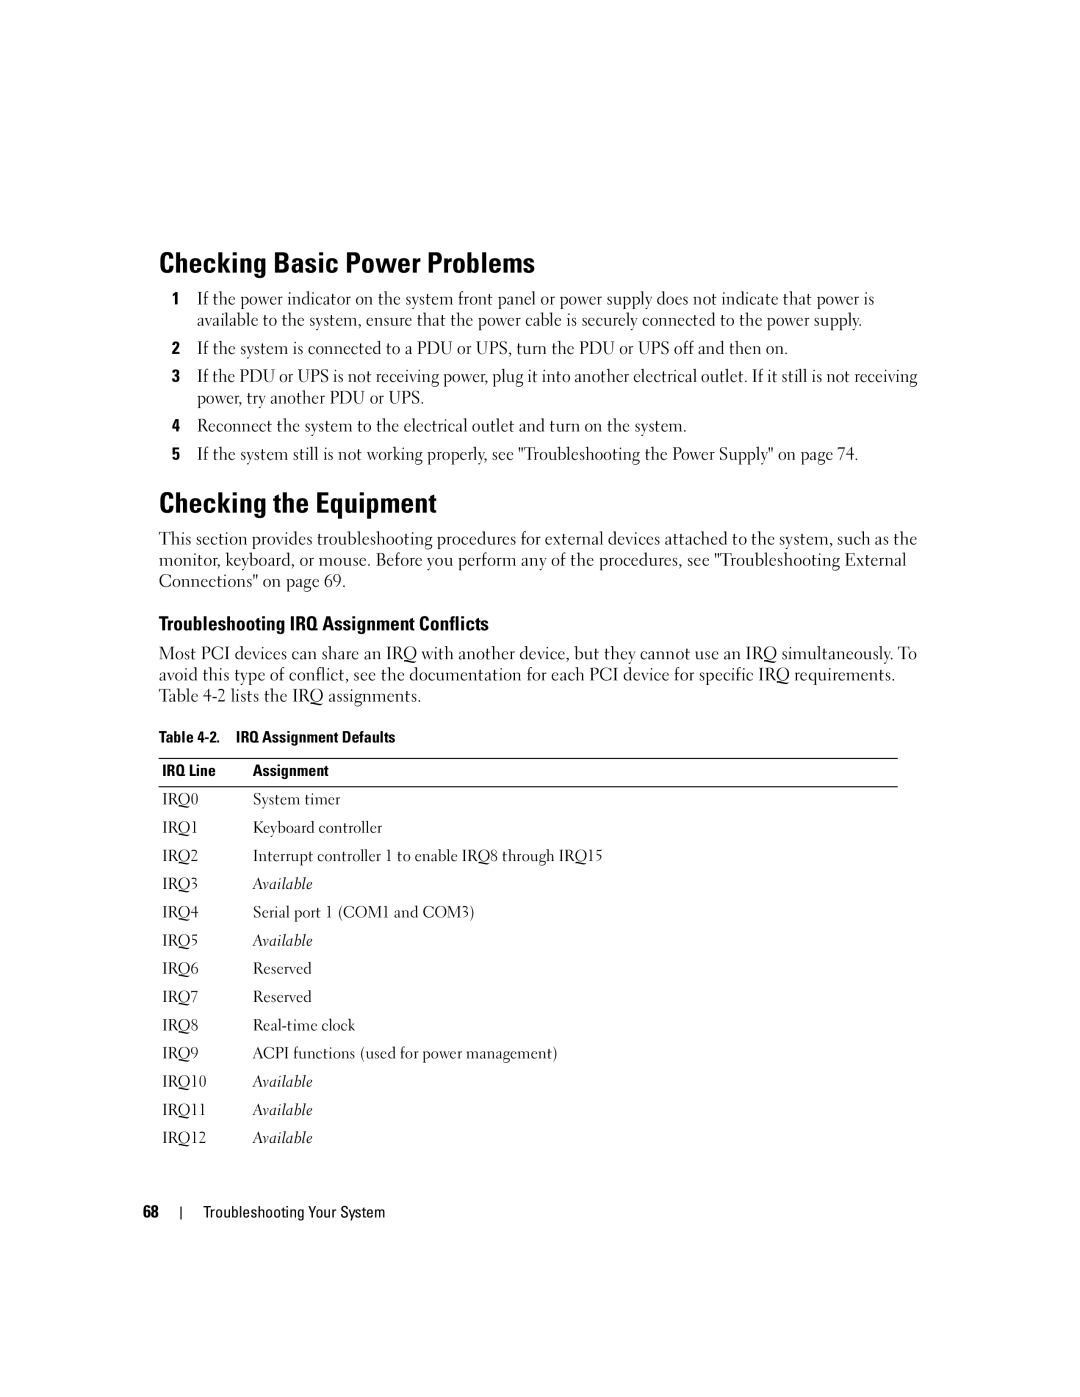 Dell SC1435 owner manual Checking Basic Power Problems, Checking the Equipment, Troubleshooting IRQ Assignment Conflicts 